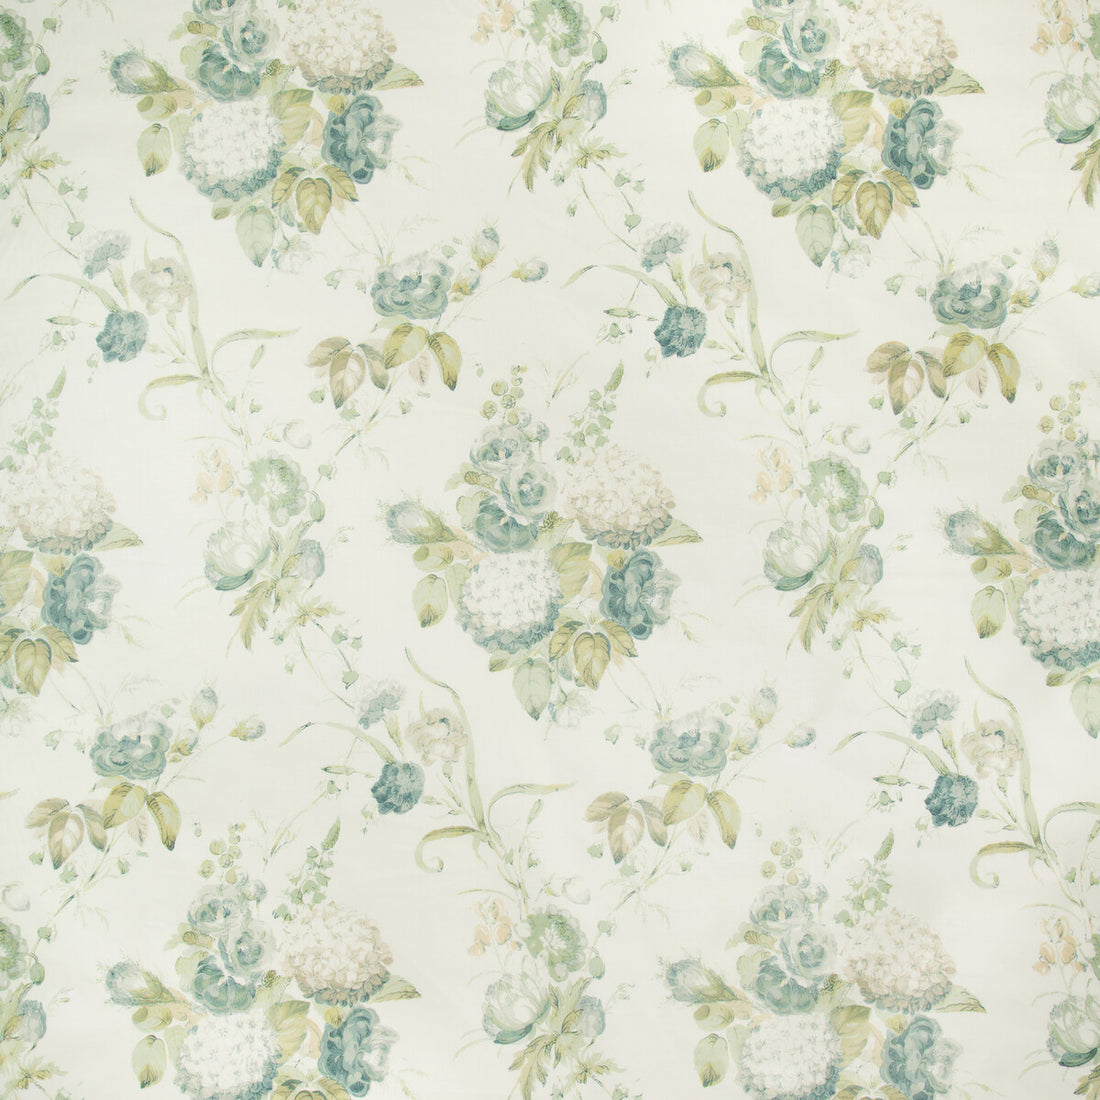 Adelyn Handblock fabric in celadon color - pattern 2018100.313.0 - by Lee Jofa in the Lj Showroom Only 2018 collection